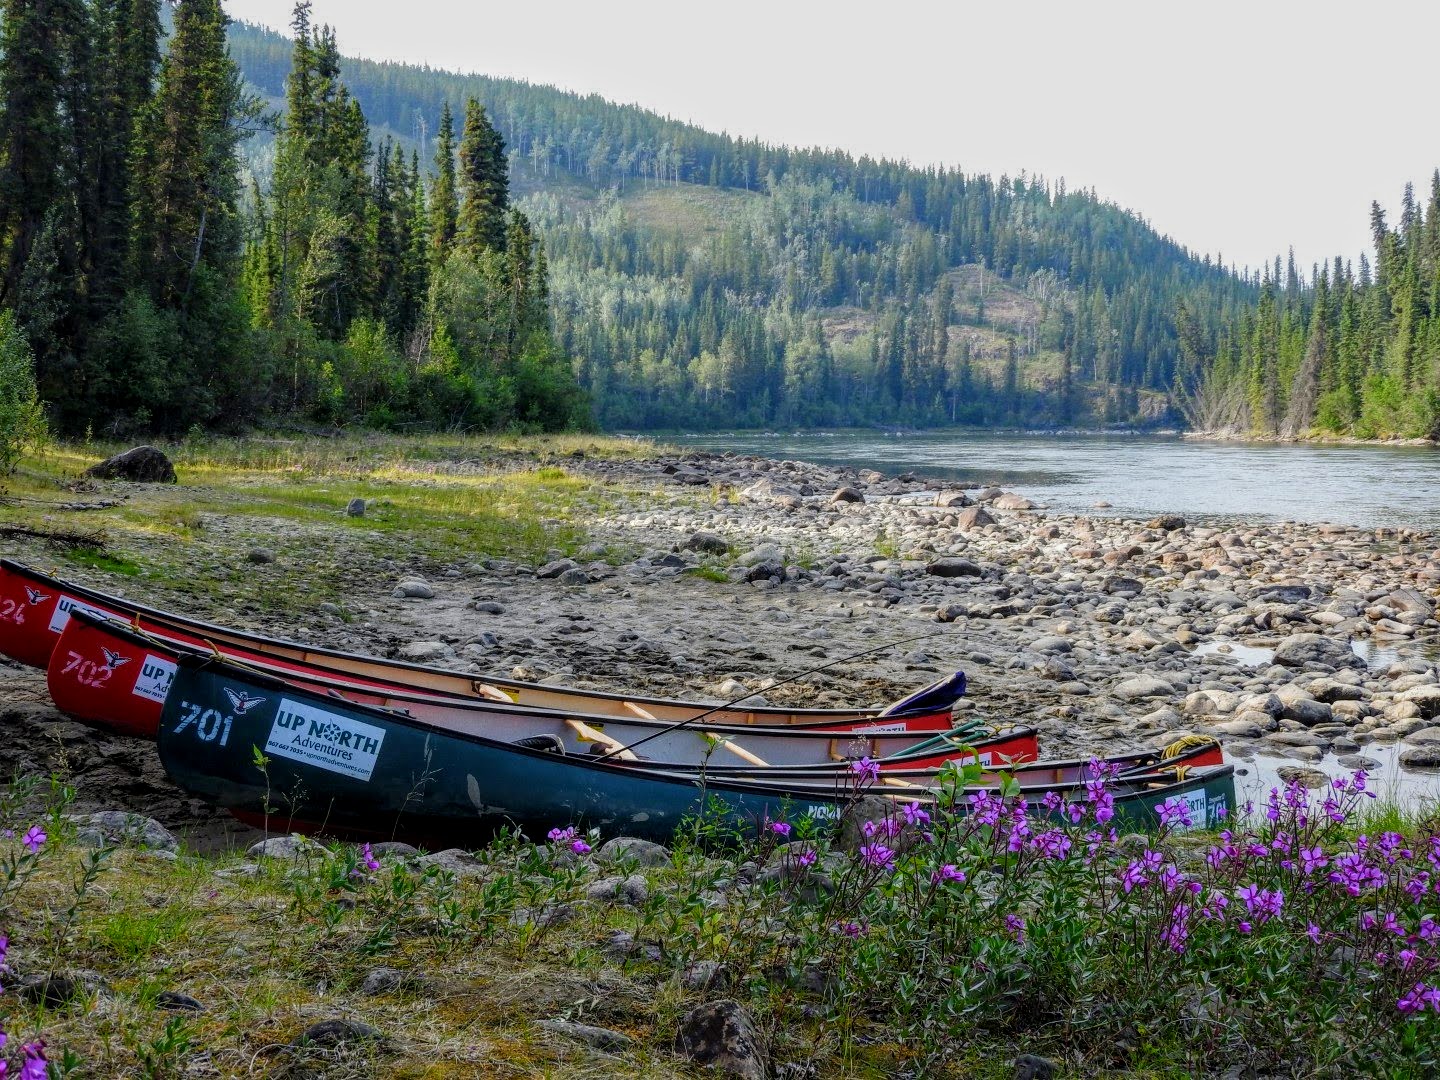 LOAFin AROUND and KANOE TRIPPING : Canoeing the Teslin and Yukon Rivers ...